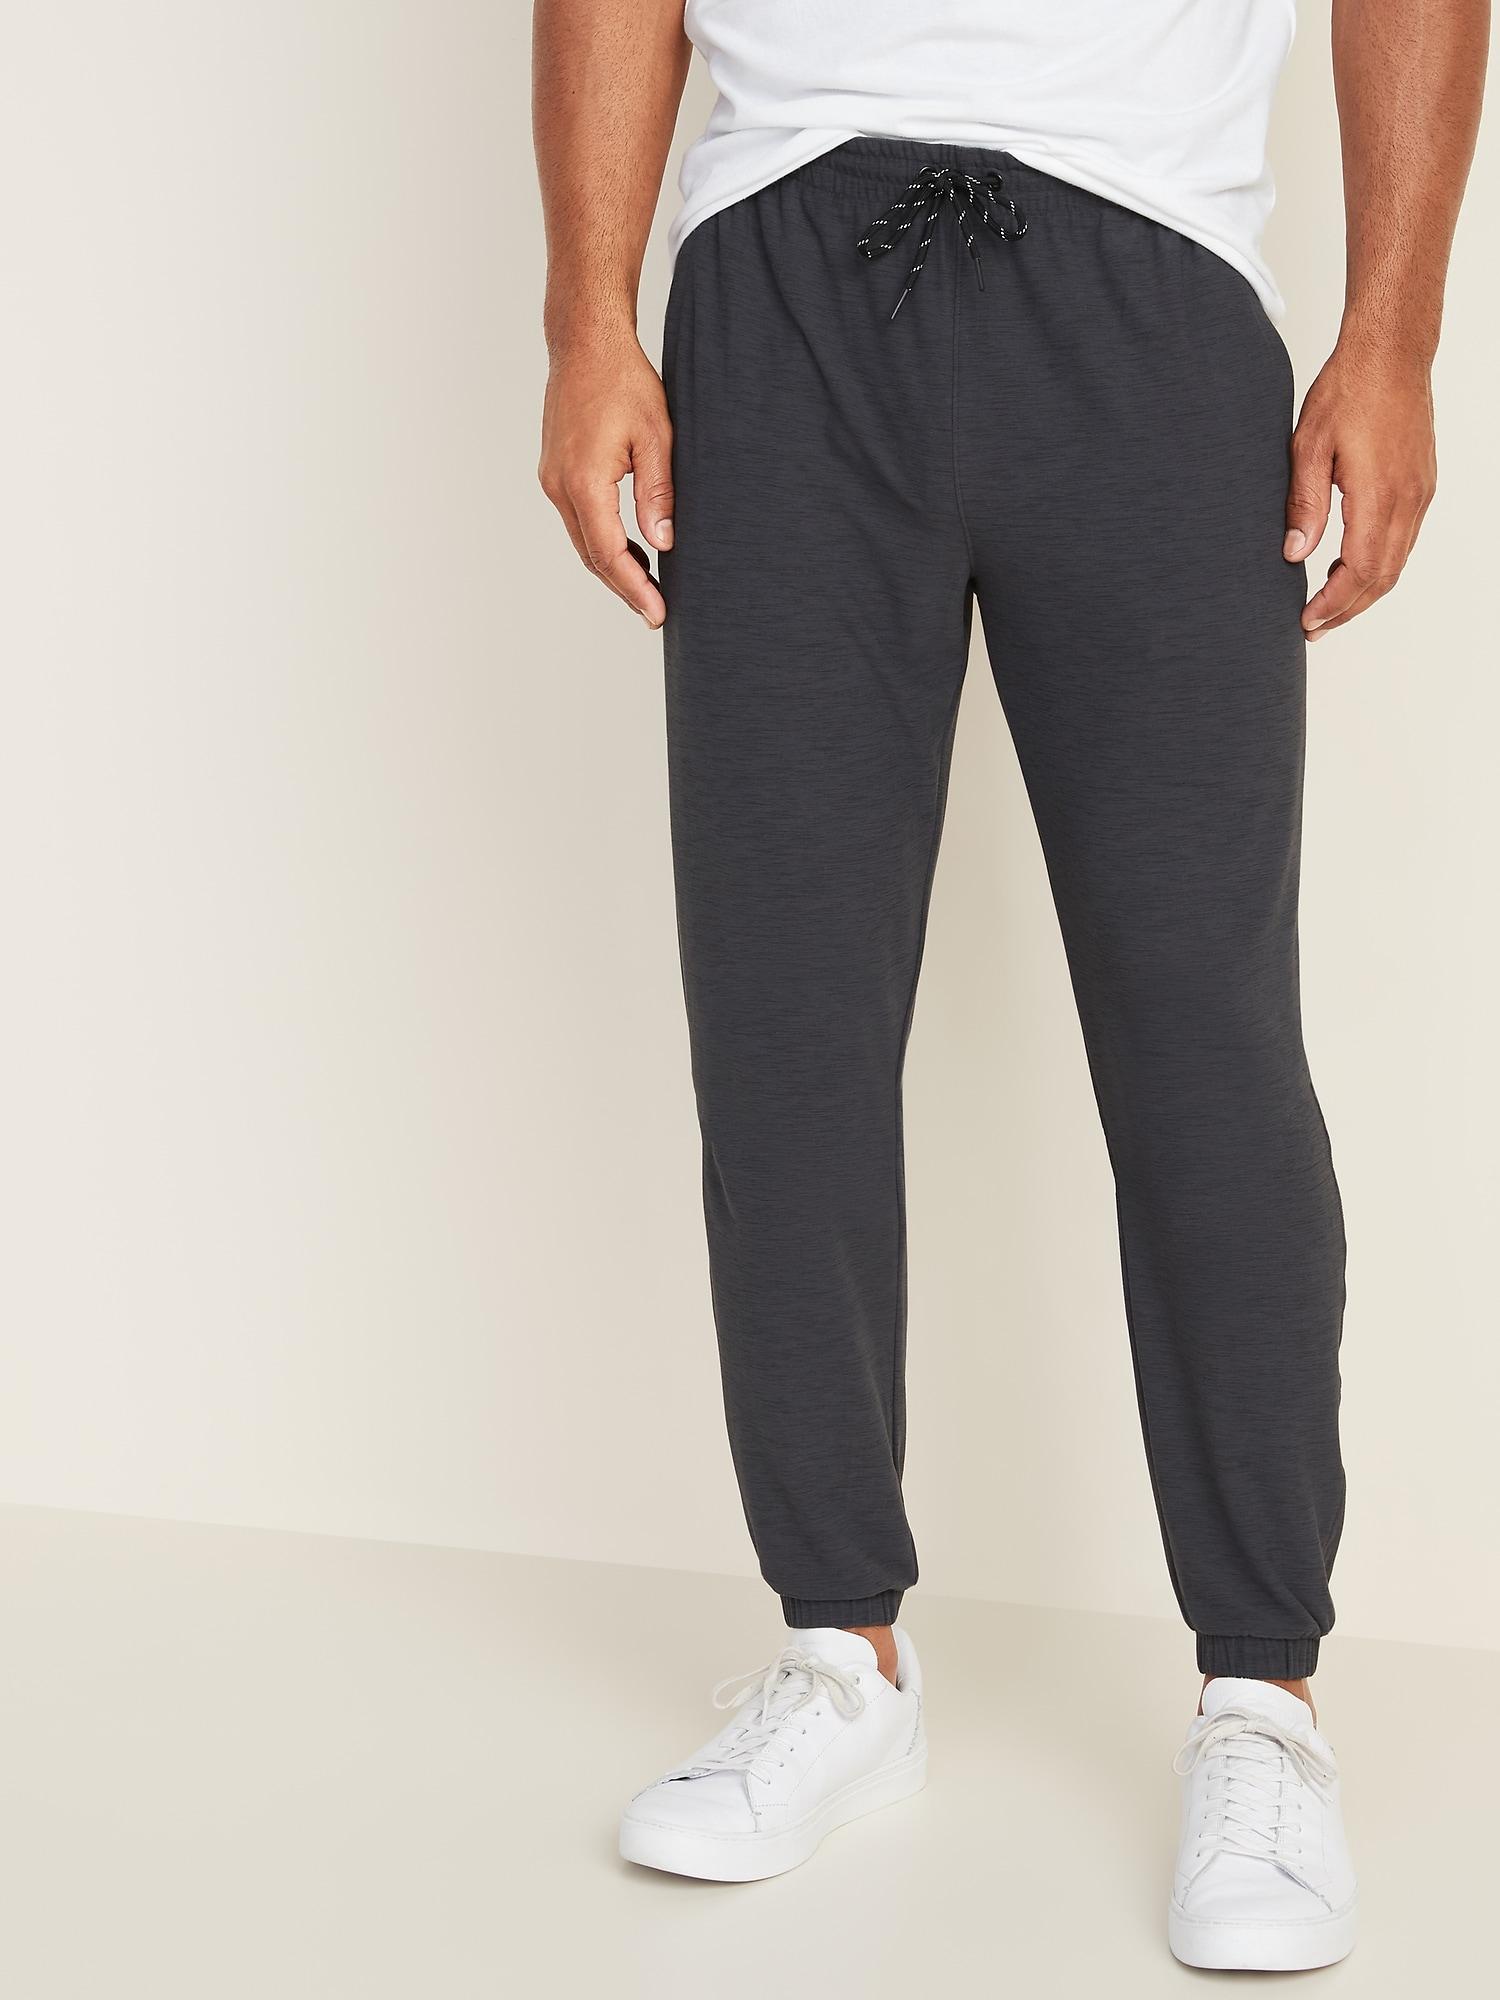 old navy go dry joggers